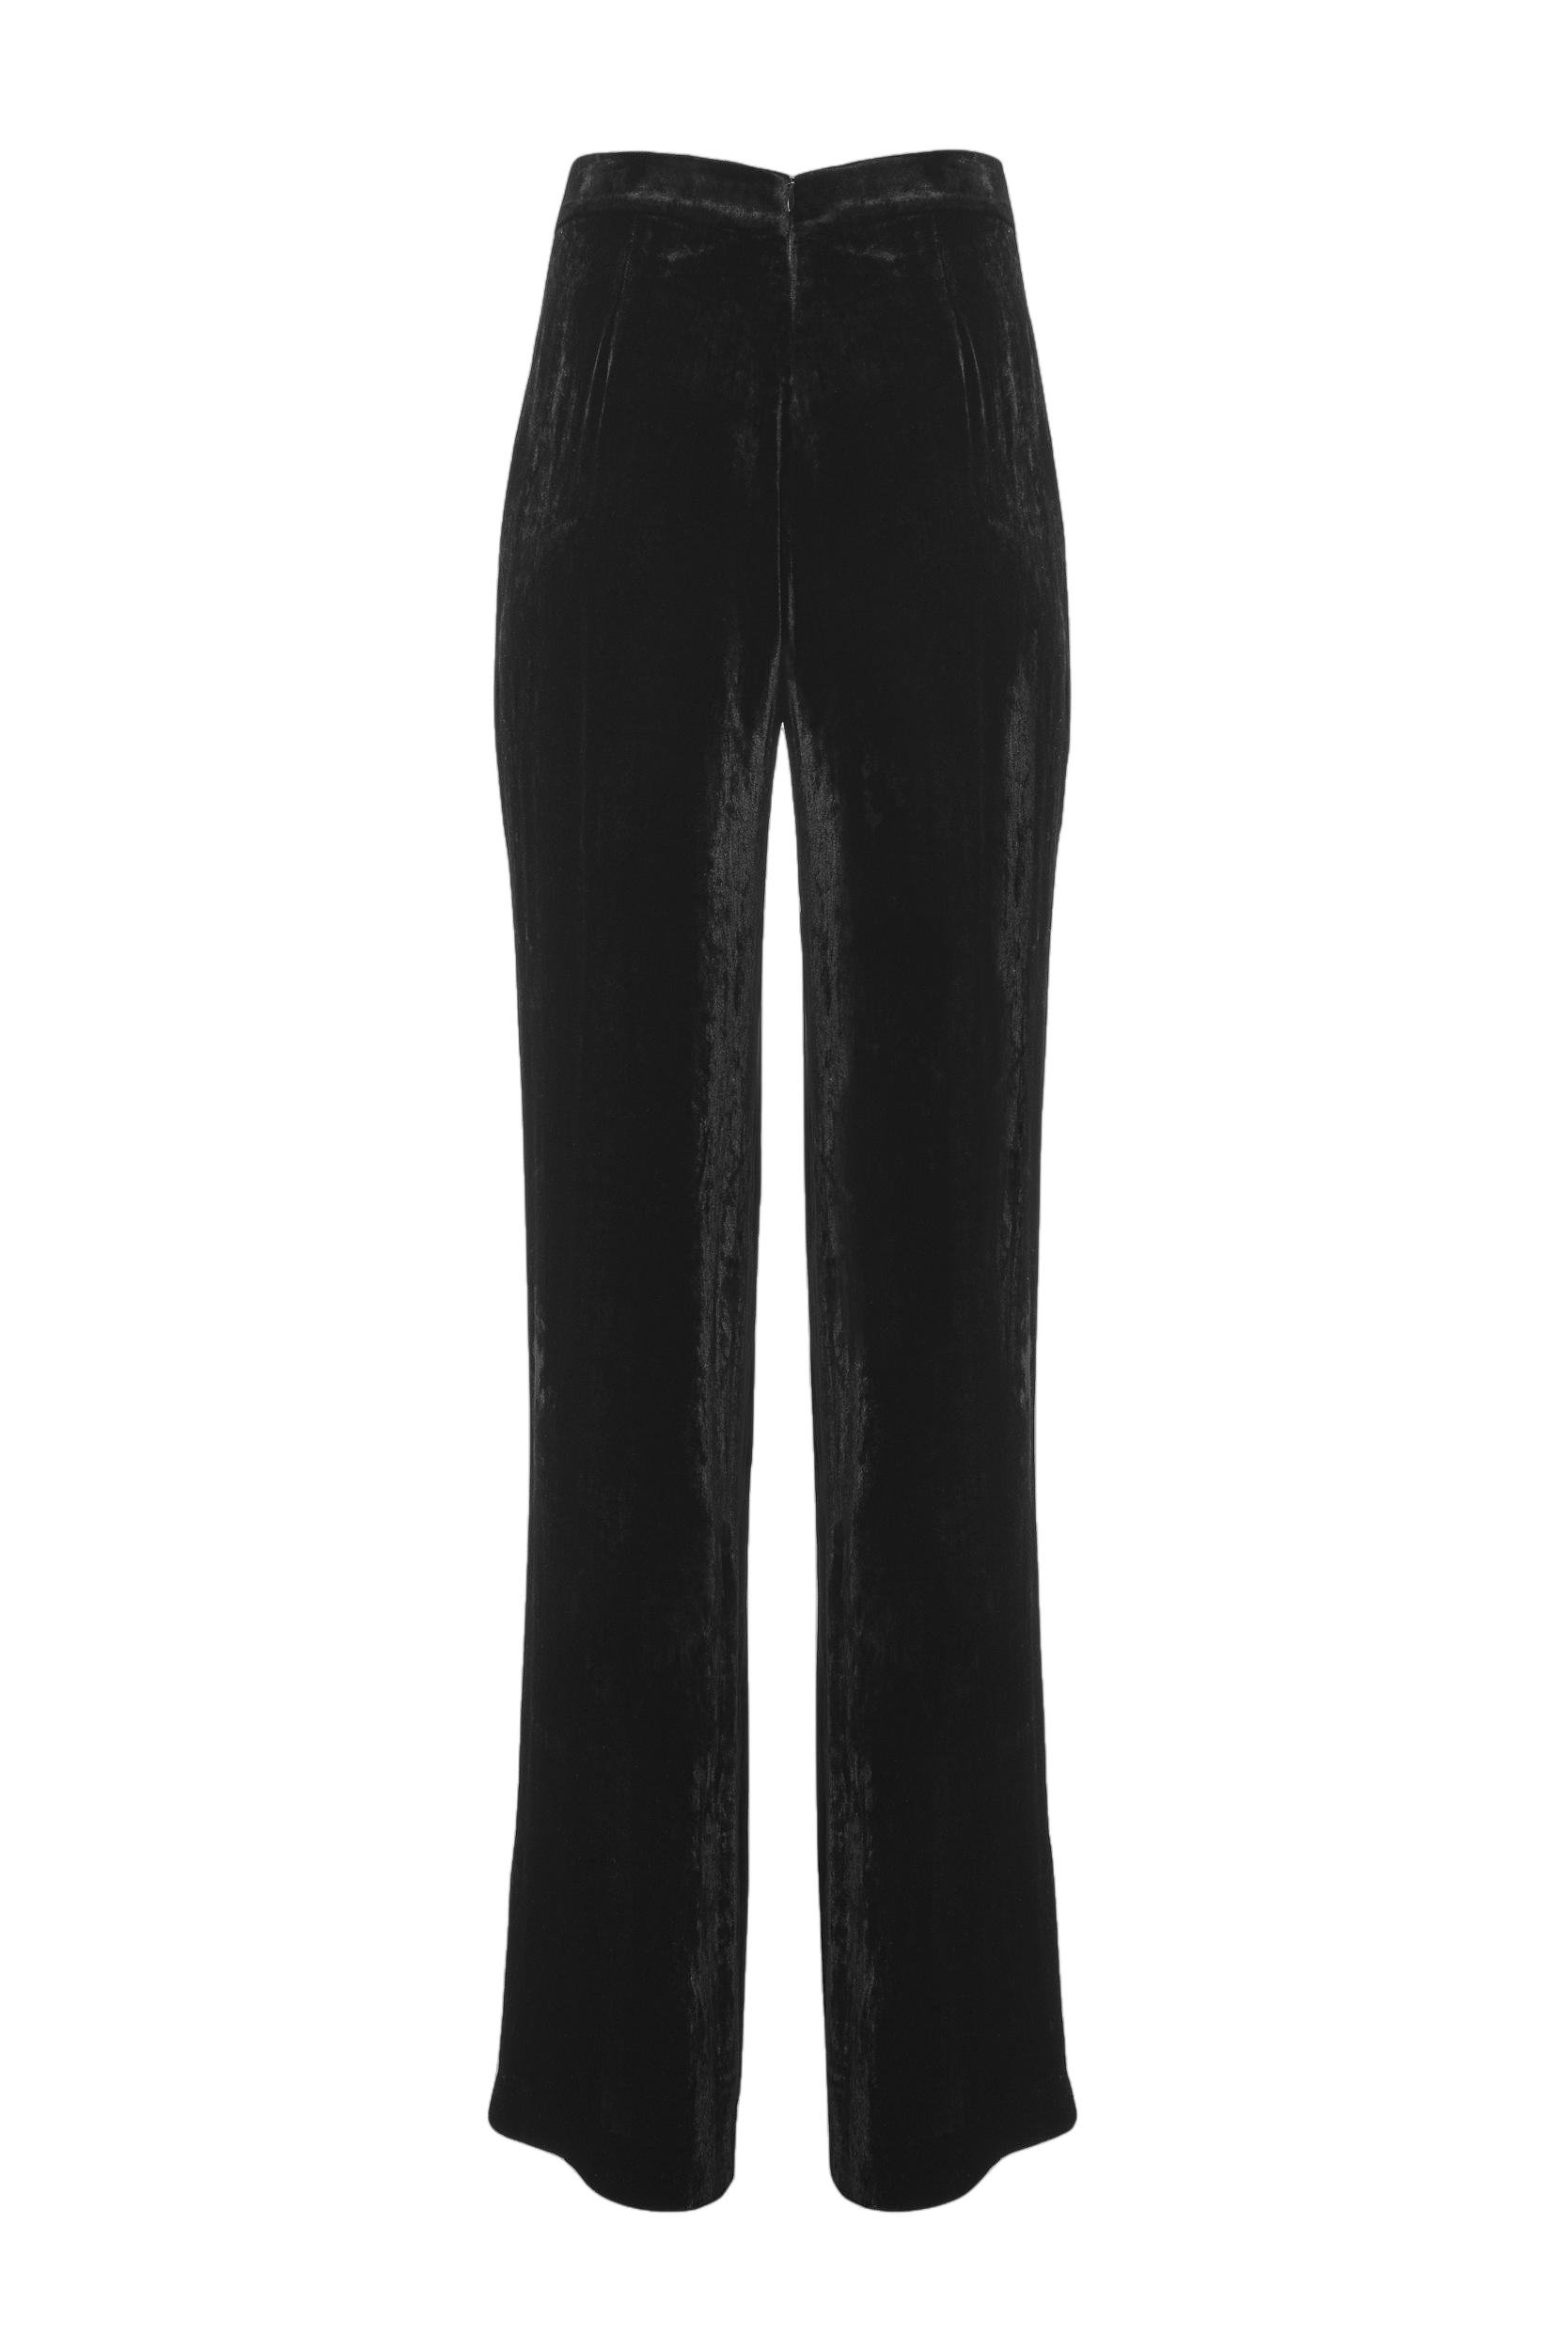 Shop The Silk Velvet Trousers from Lita Couture at Seezona